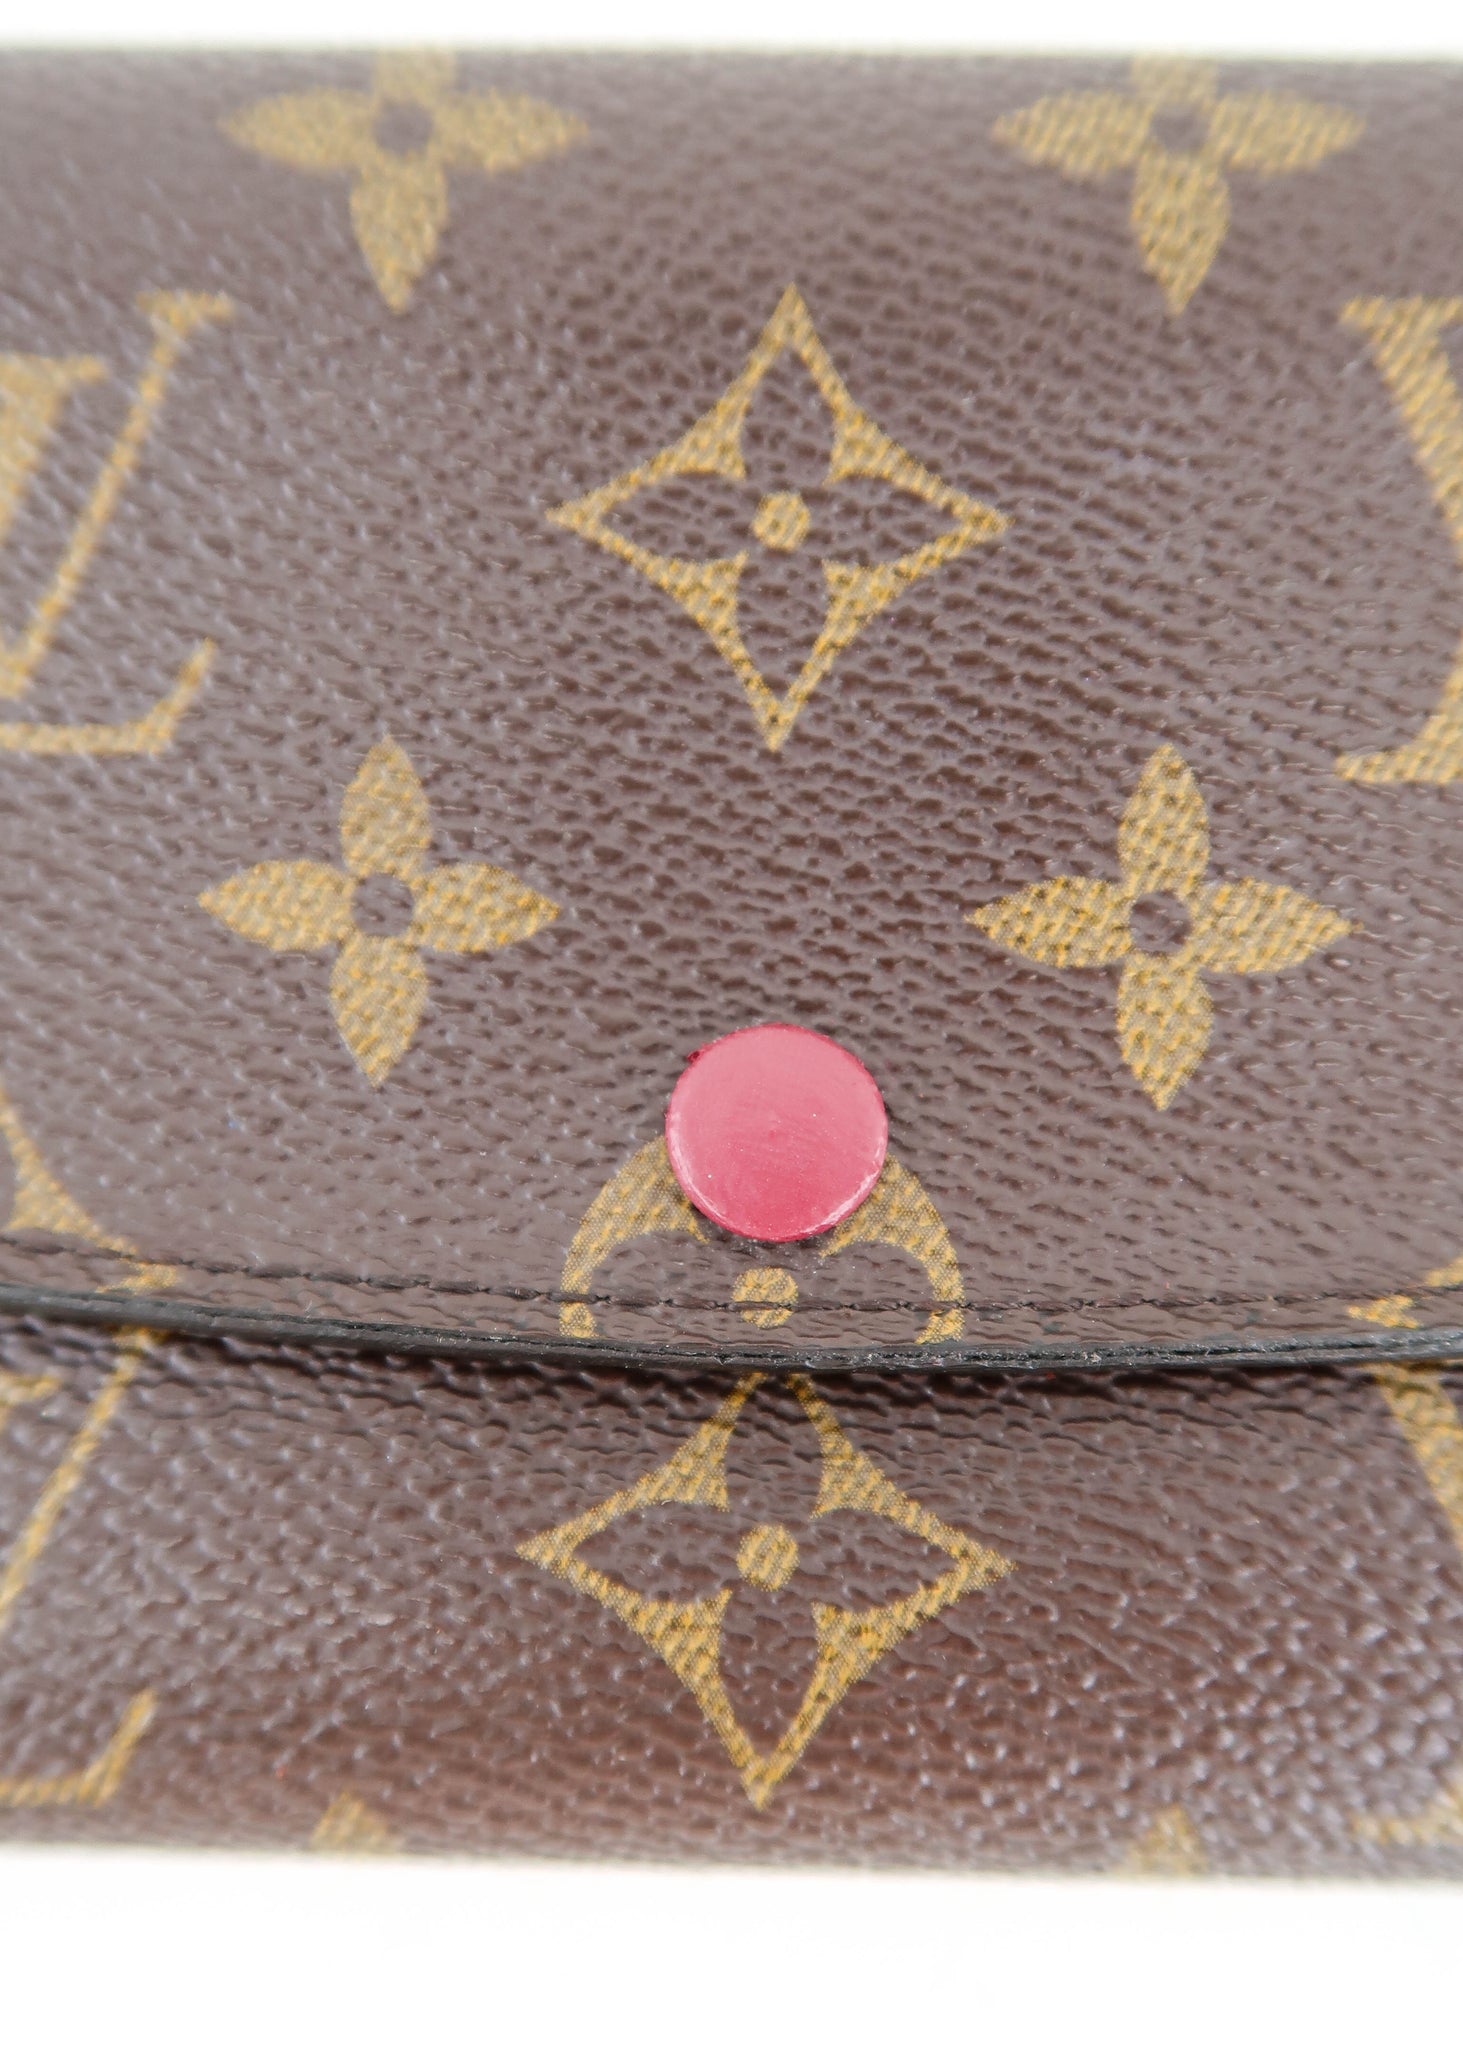 NWT Louis Vuitton Emilie Wallet, Monogram and Light Pink Coated